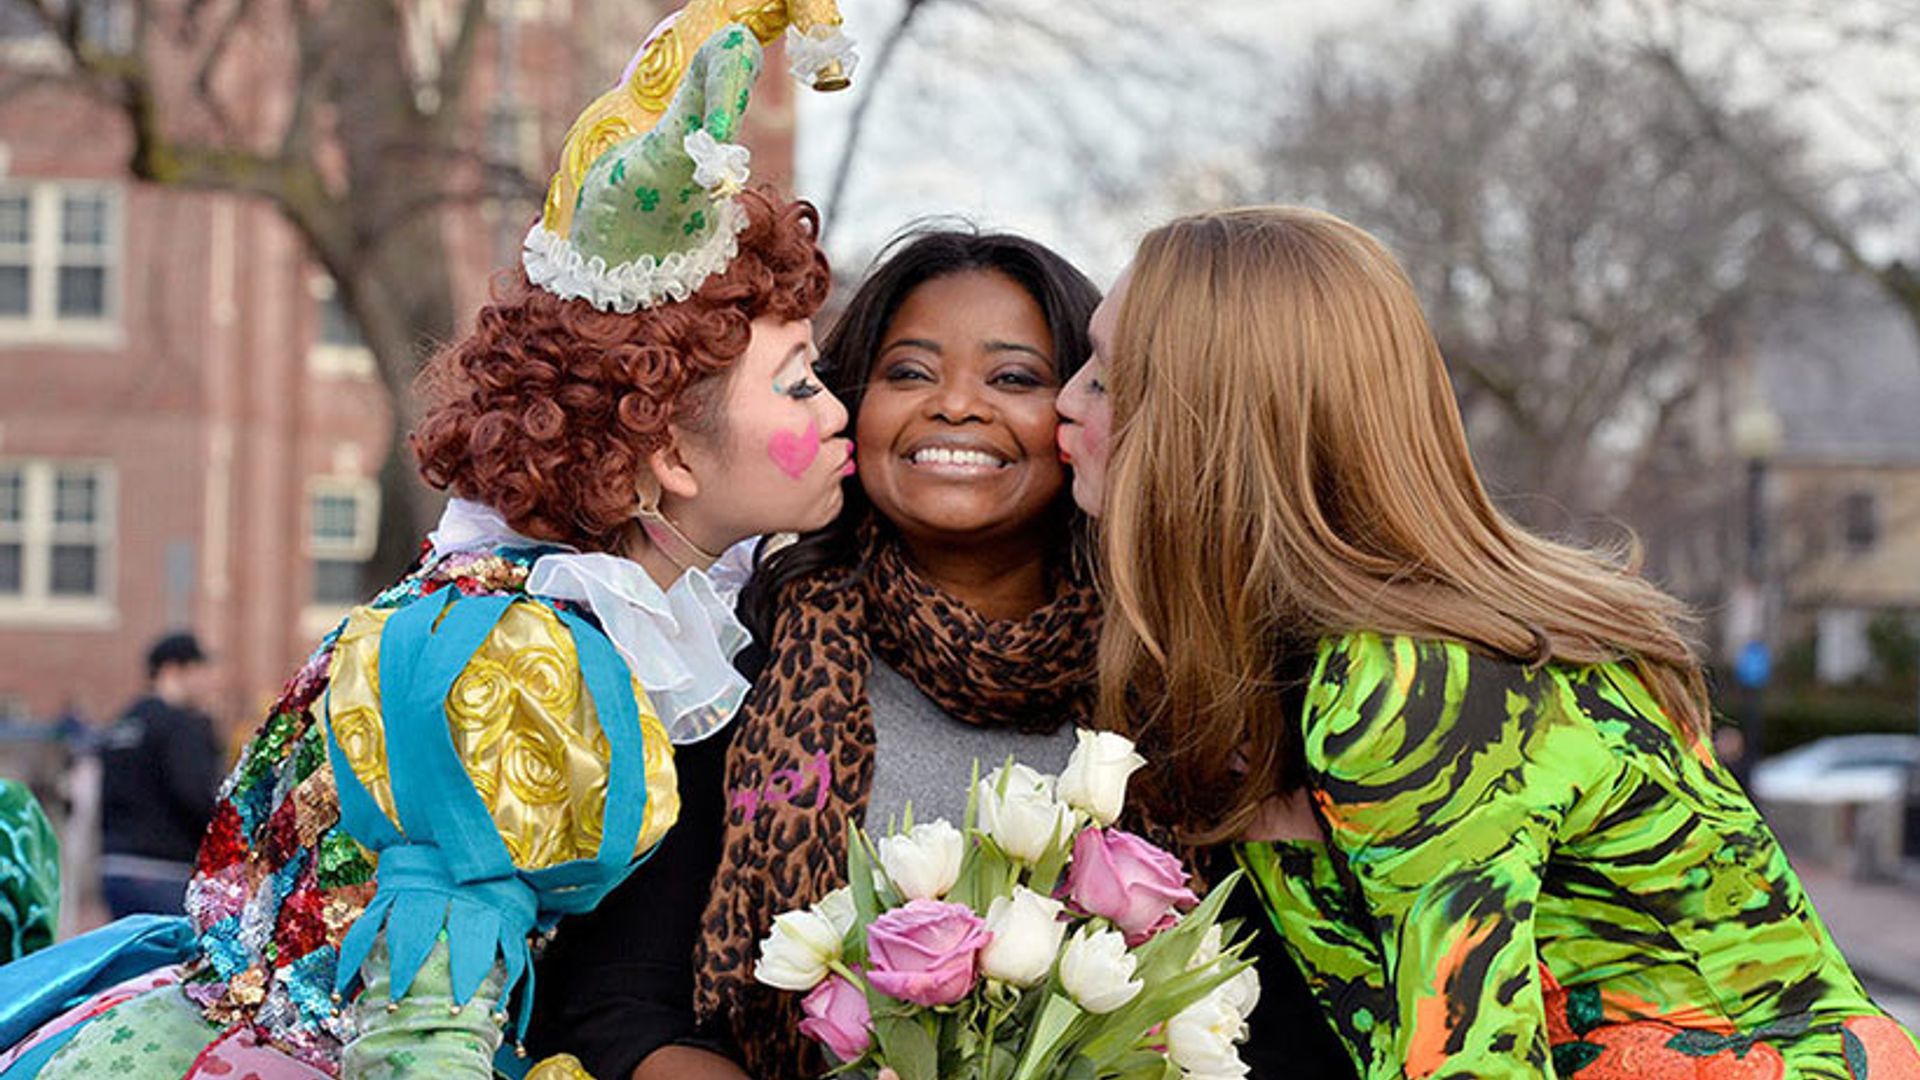 Octavia Spencer is Harvard's Hasty Pudding Woman of the Year!